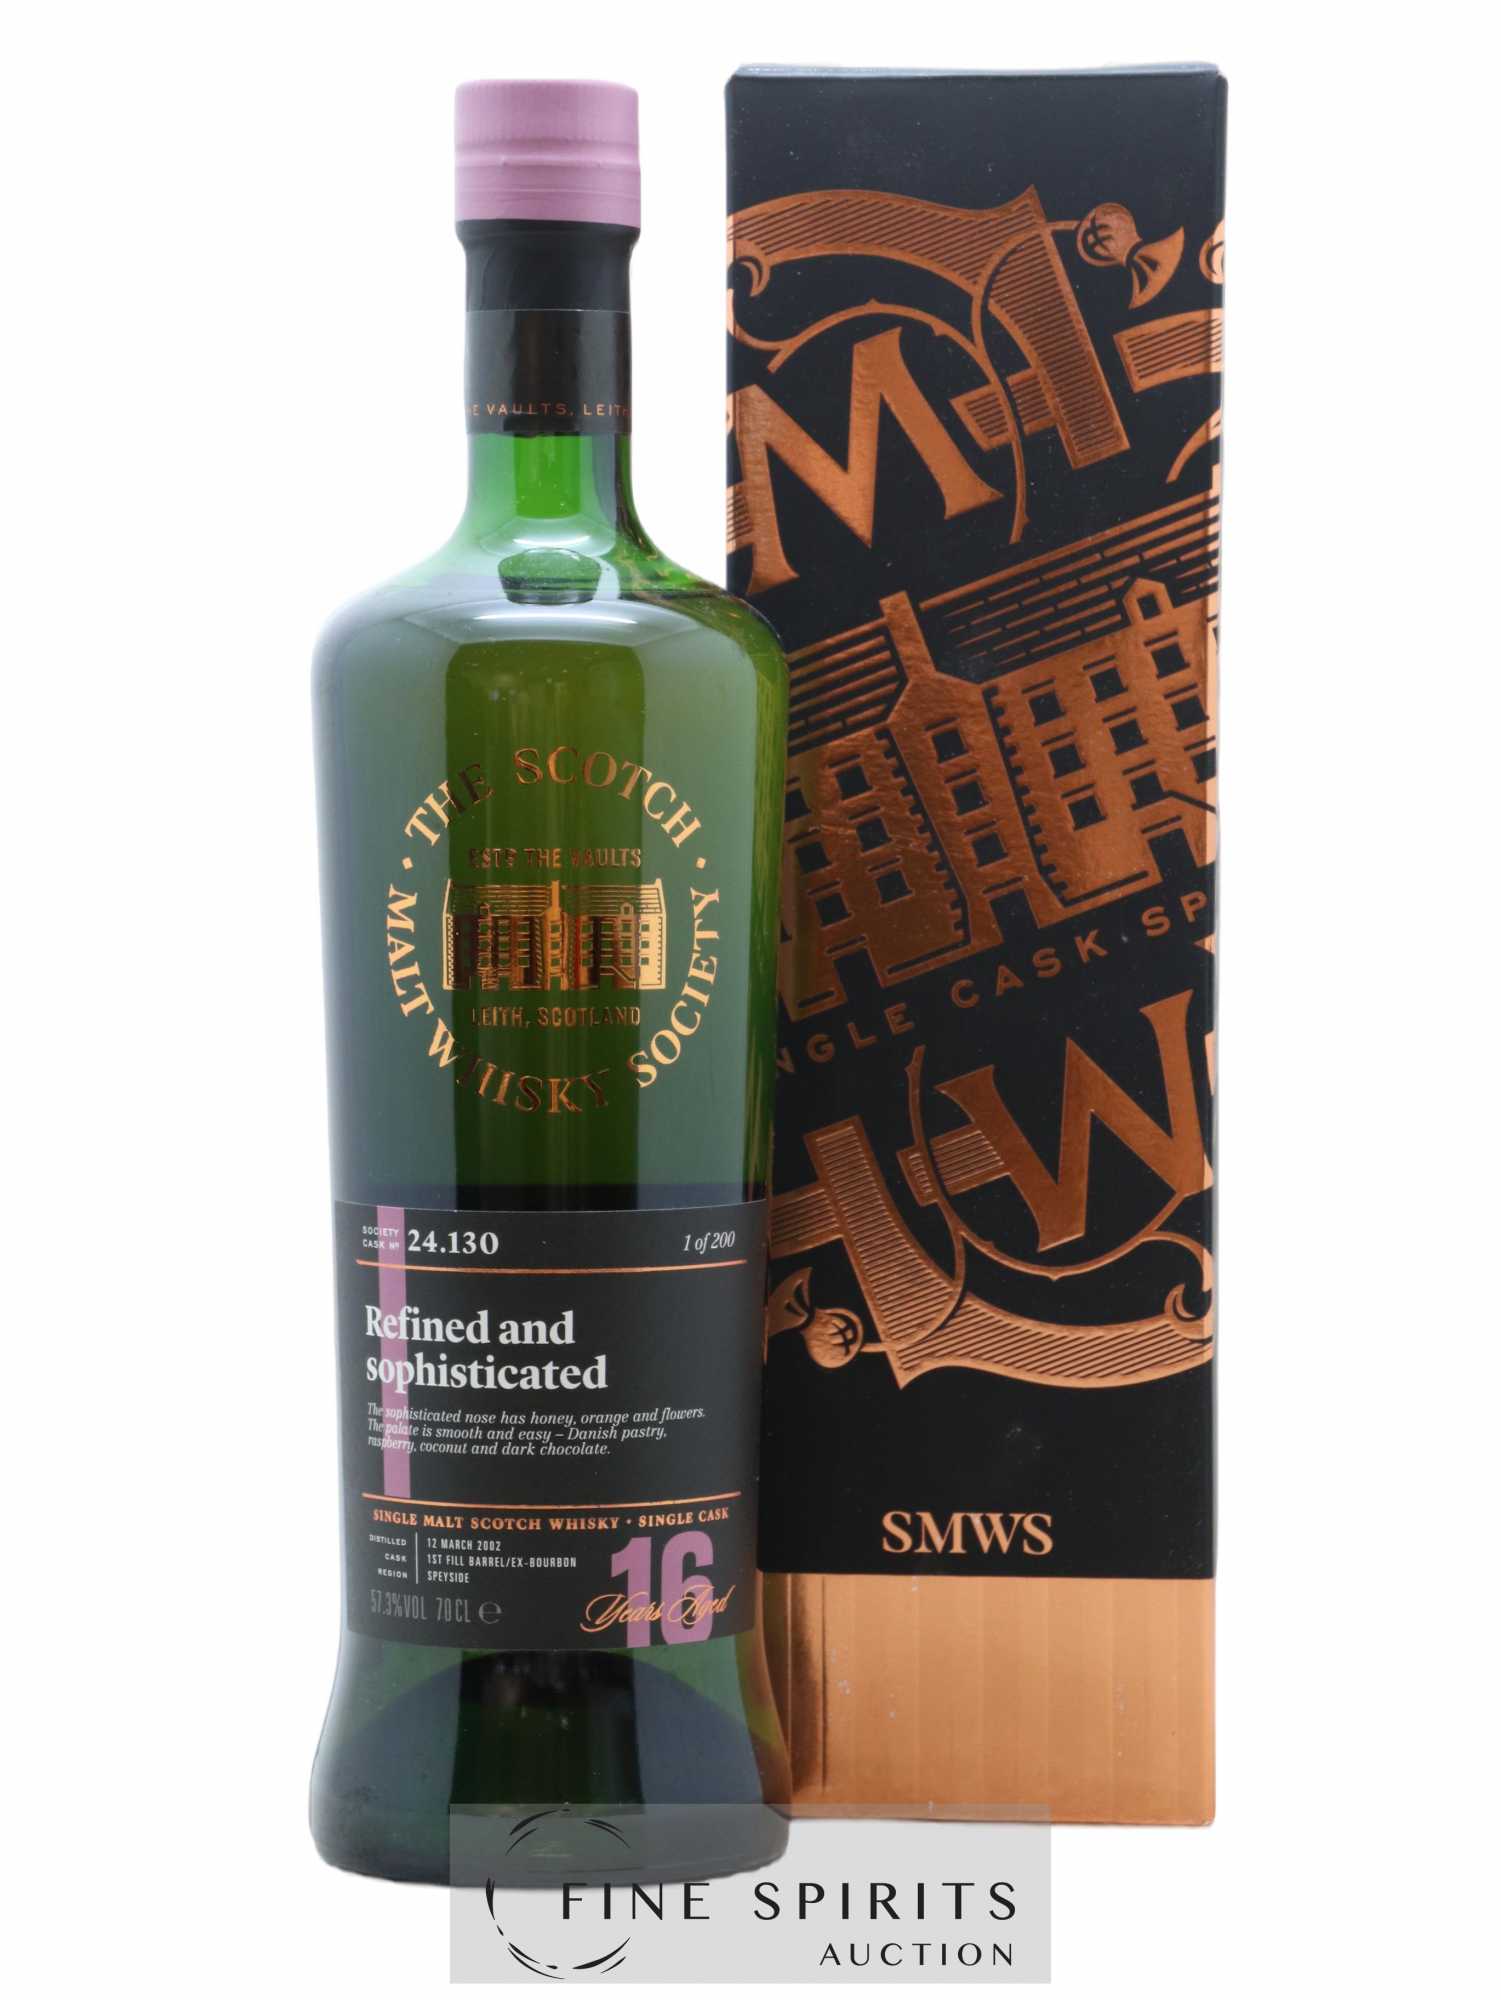 Refined and Sophisticated 16 years 2002 The Scotch Malt Whisky Society Cask n°24.130 - One of 200